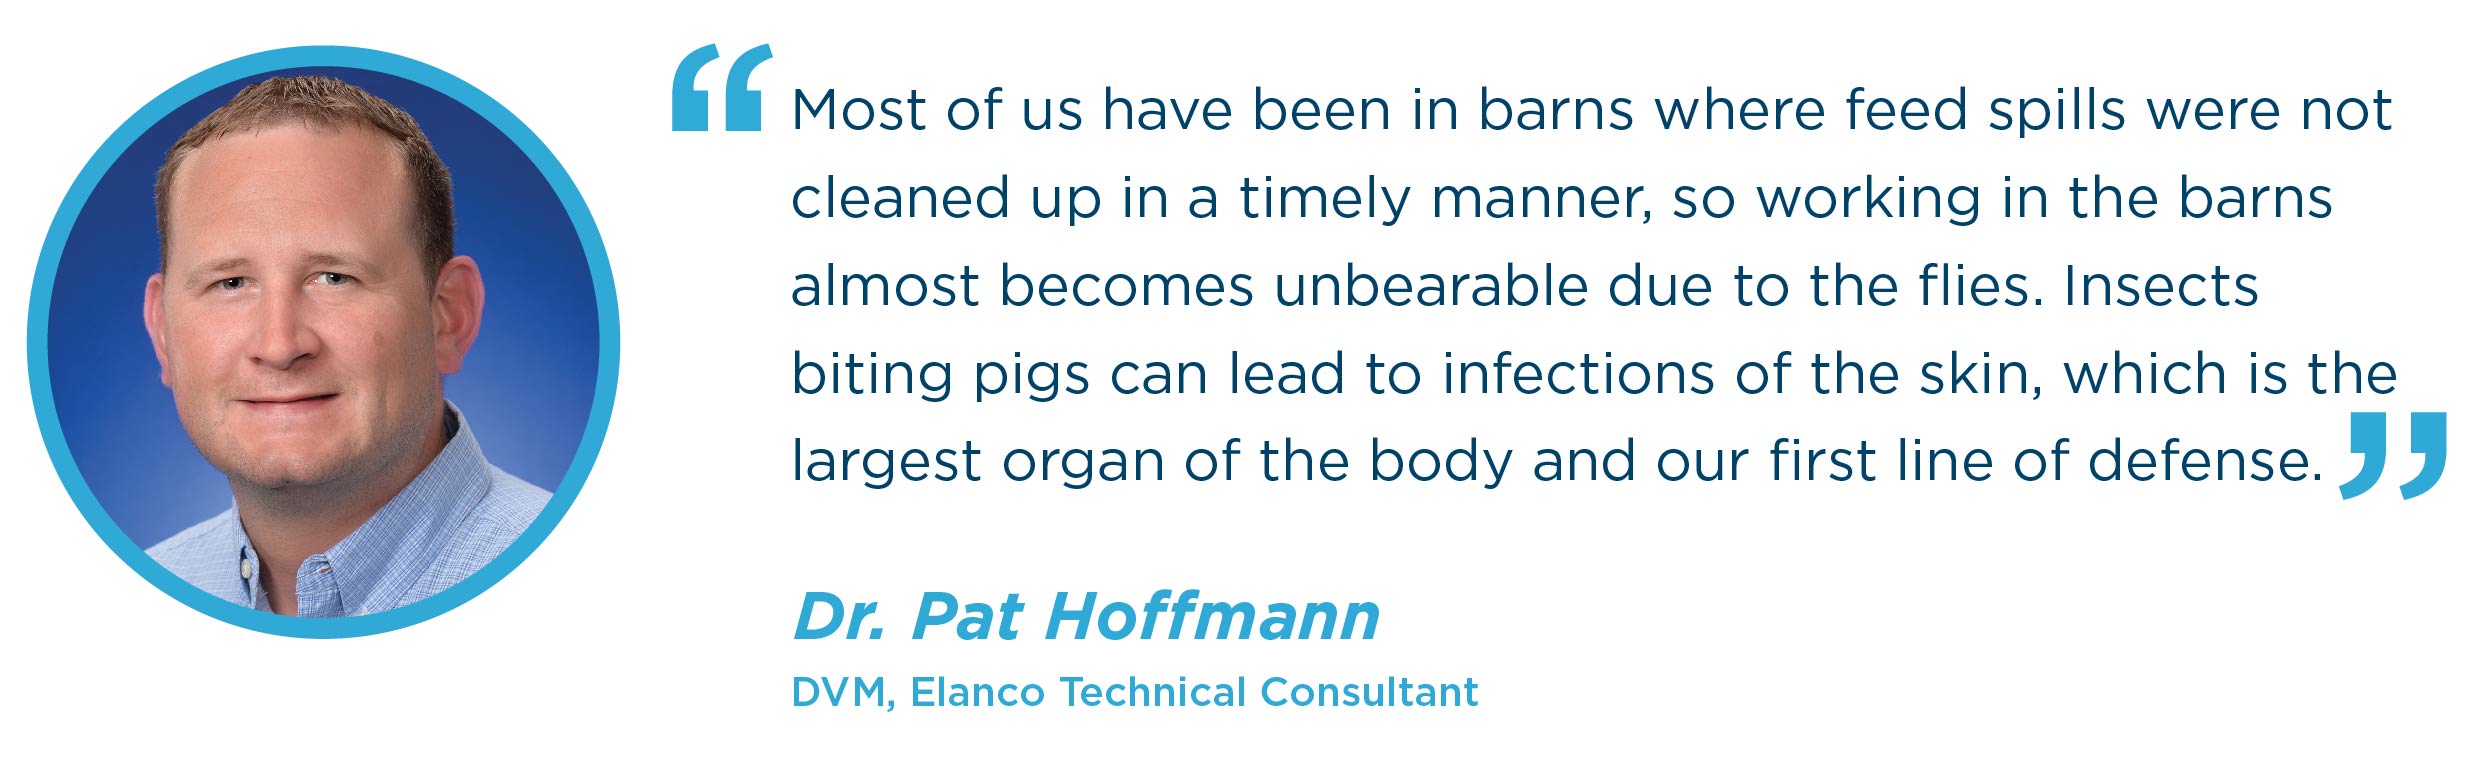 Most of us have been in barns where feed spills were not cleaned up in a timely manner, so working in the barns almost becomes unbearable due to the flies. Insects biting pigs can lead to infections of the skin, which is the largest organ of the body and our first line of defense. Dr. Pat Homann DVM, Elanco Technical Consultant